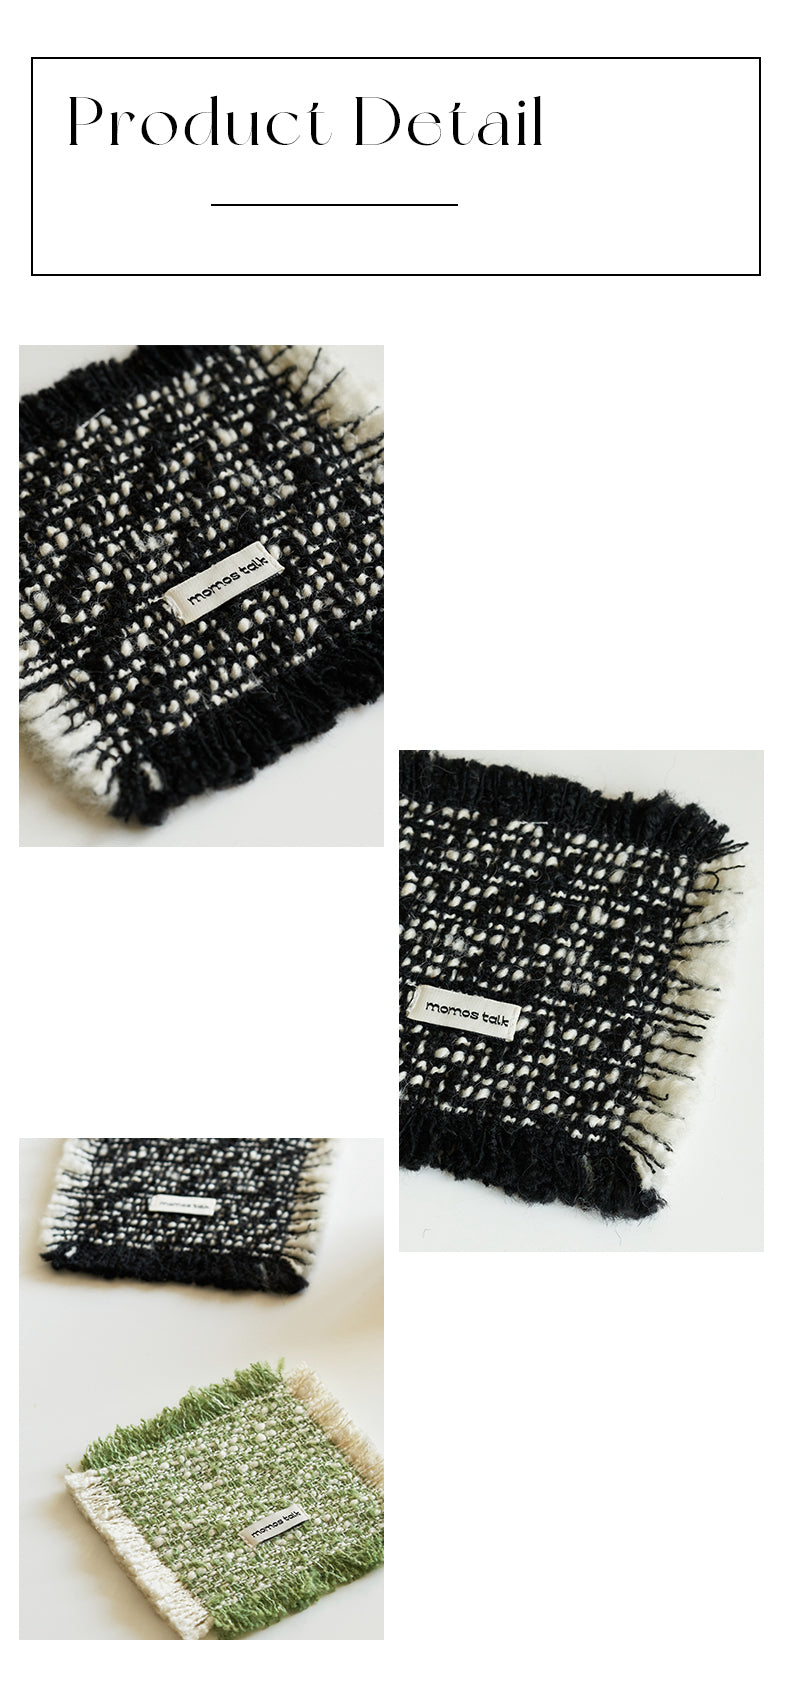 French tassel handmade woven houndstooth checker style coaster, by A Bit Sleepy homeware concept store